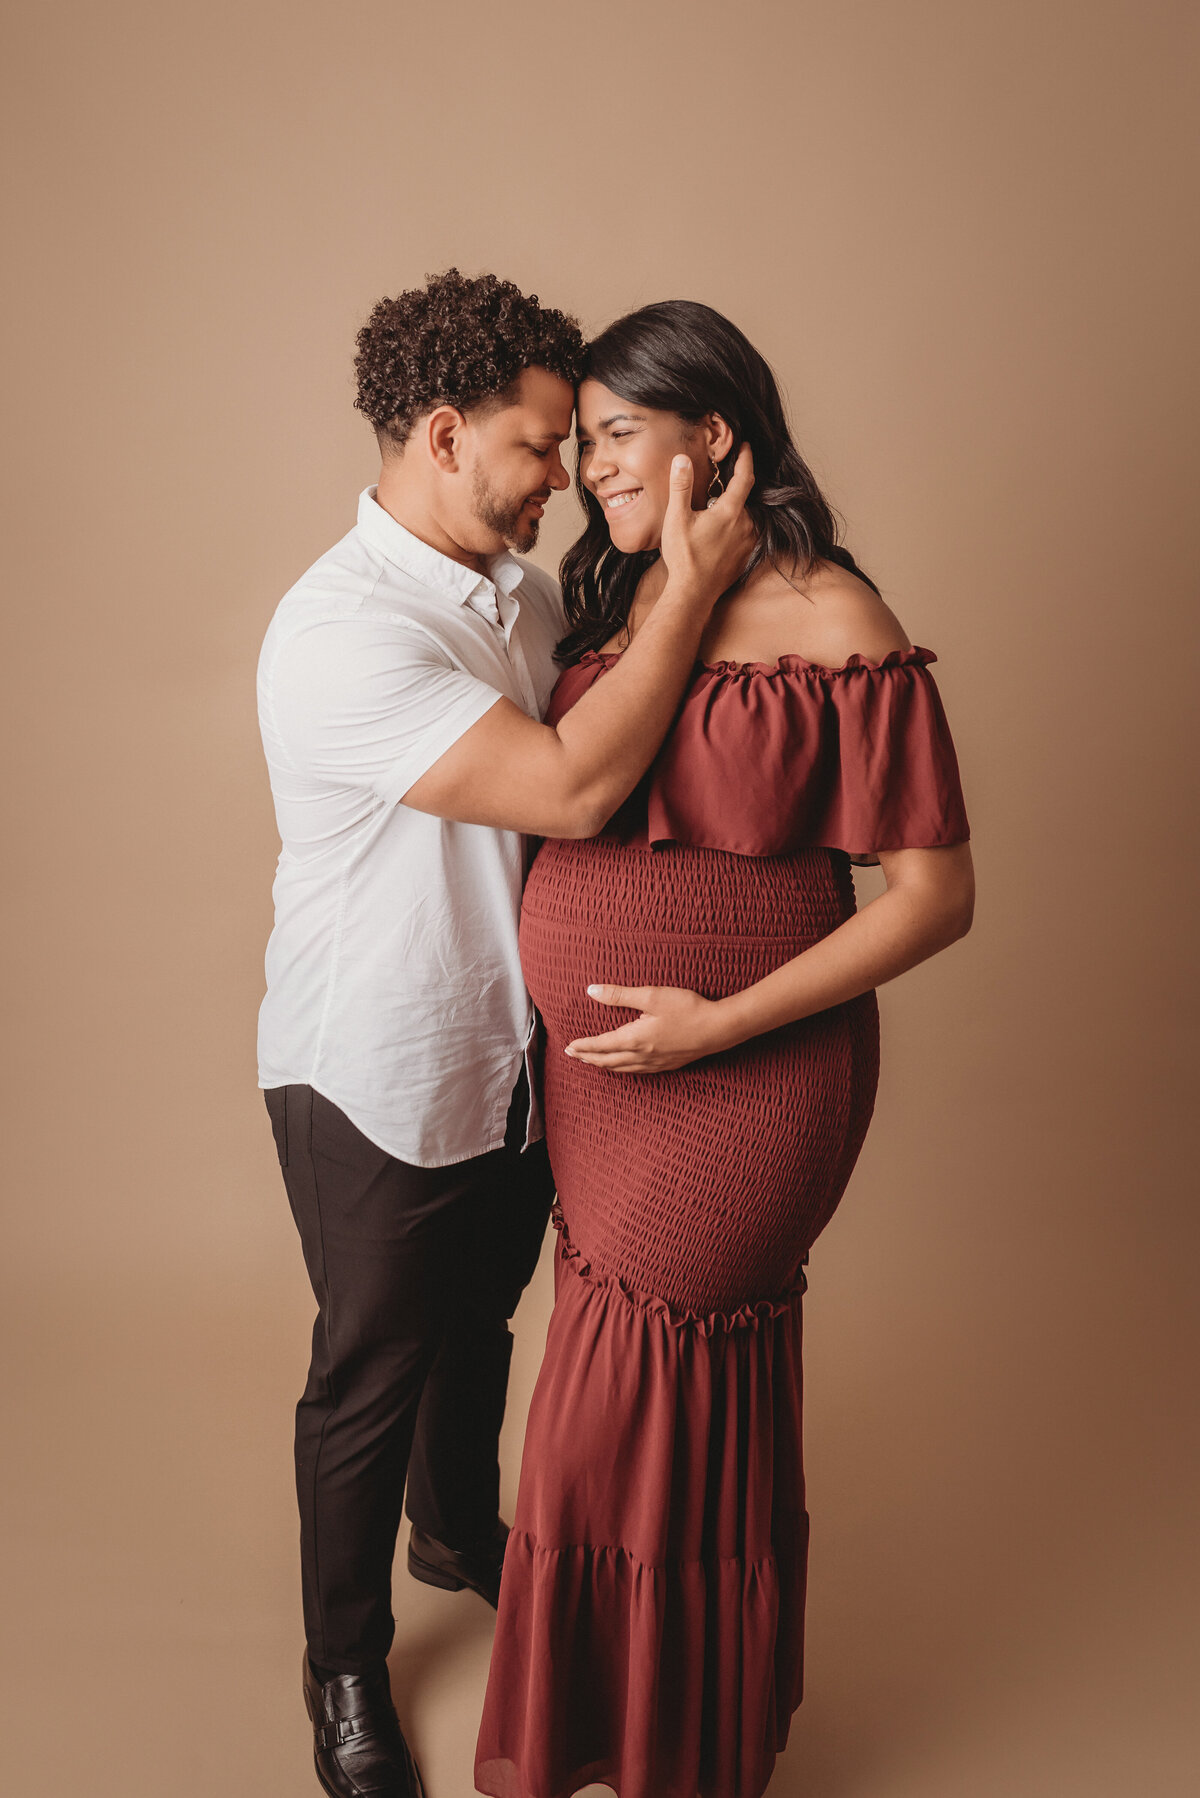 Pregnant couple standing up holding each other in maternity photo shoot wearing burgundy maternity dress with man in white button down shirt and slacks. Woman is holding baby bump.